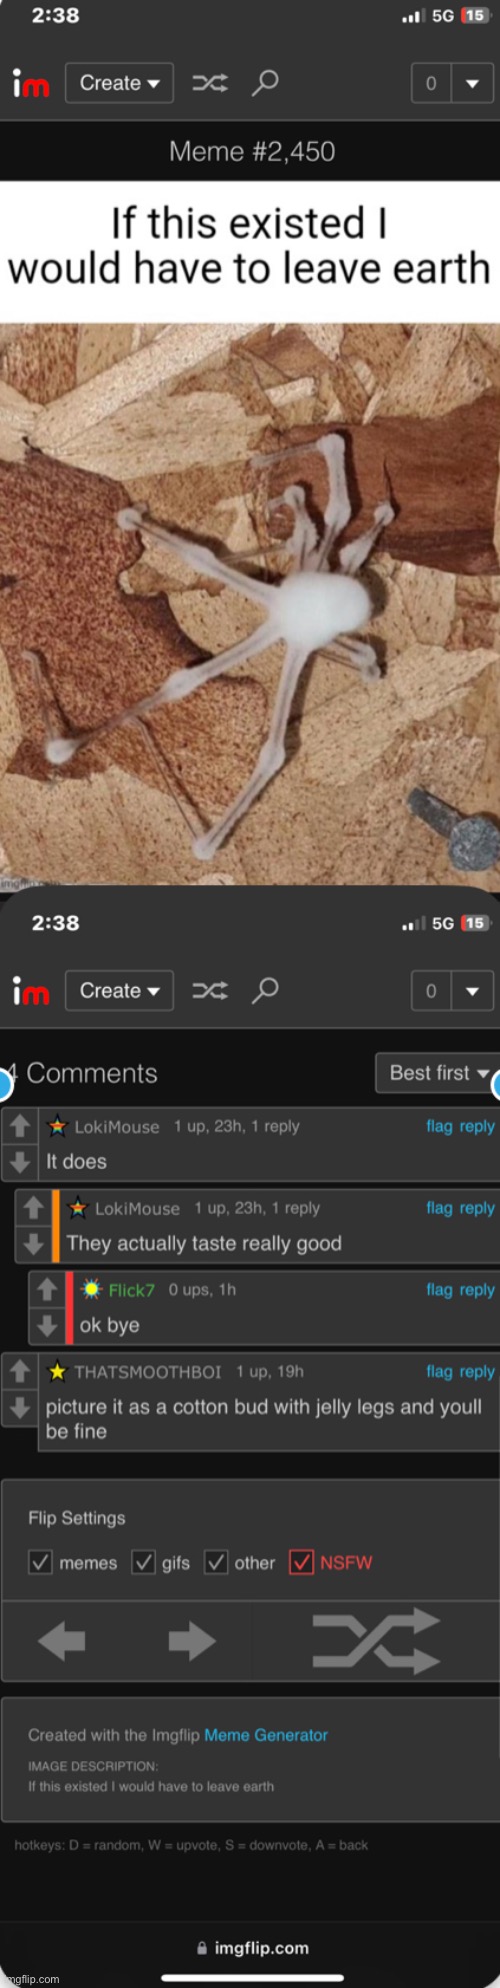 i cant escape cursed comments | image tagged in cursed image,cursed,comments,spider,cursed spider | made w/ Imgflip meme maker